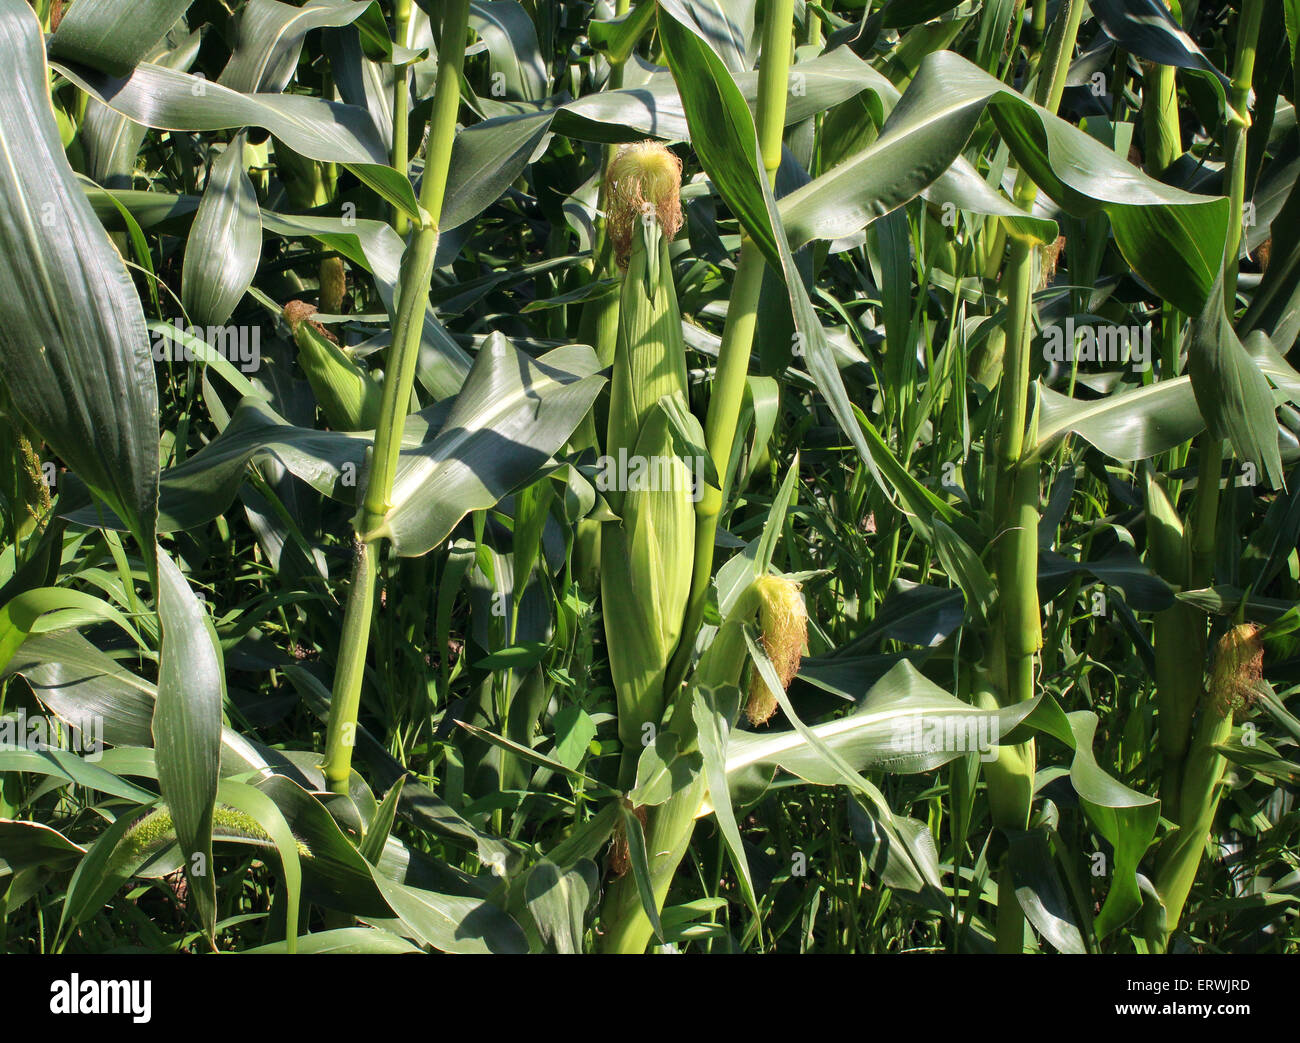 Corn field background as a symbol for agriculture of a staple food crop and farming fresh produce during the summer seasonal growing period. Stock Photo